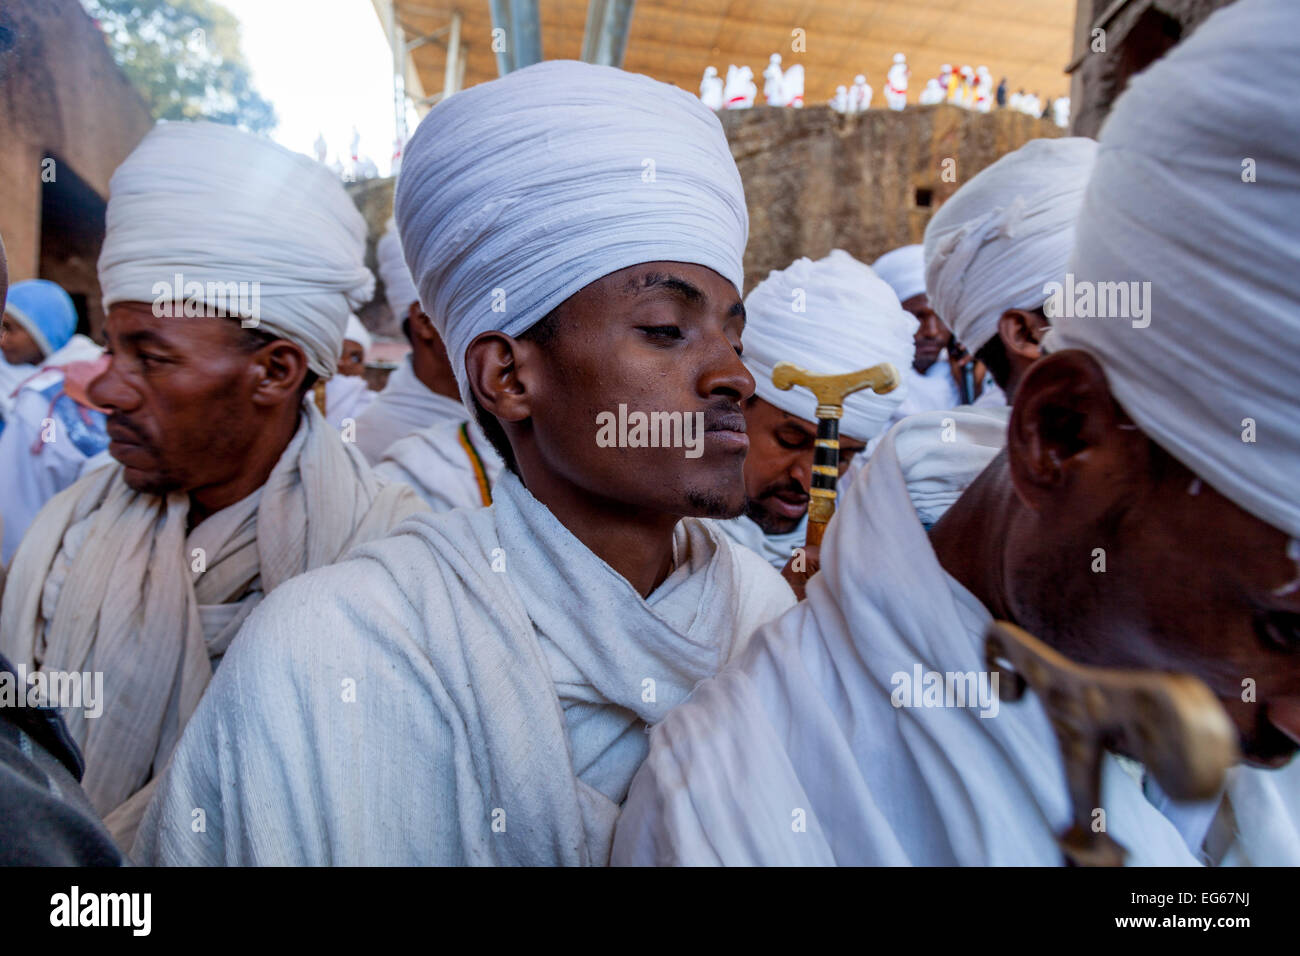 Church Priests and Deacons Taking Part In The Christmas Day Celebrations At Beite Maryam Church, Lalibela, Ethiopia Stock Photo